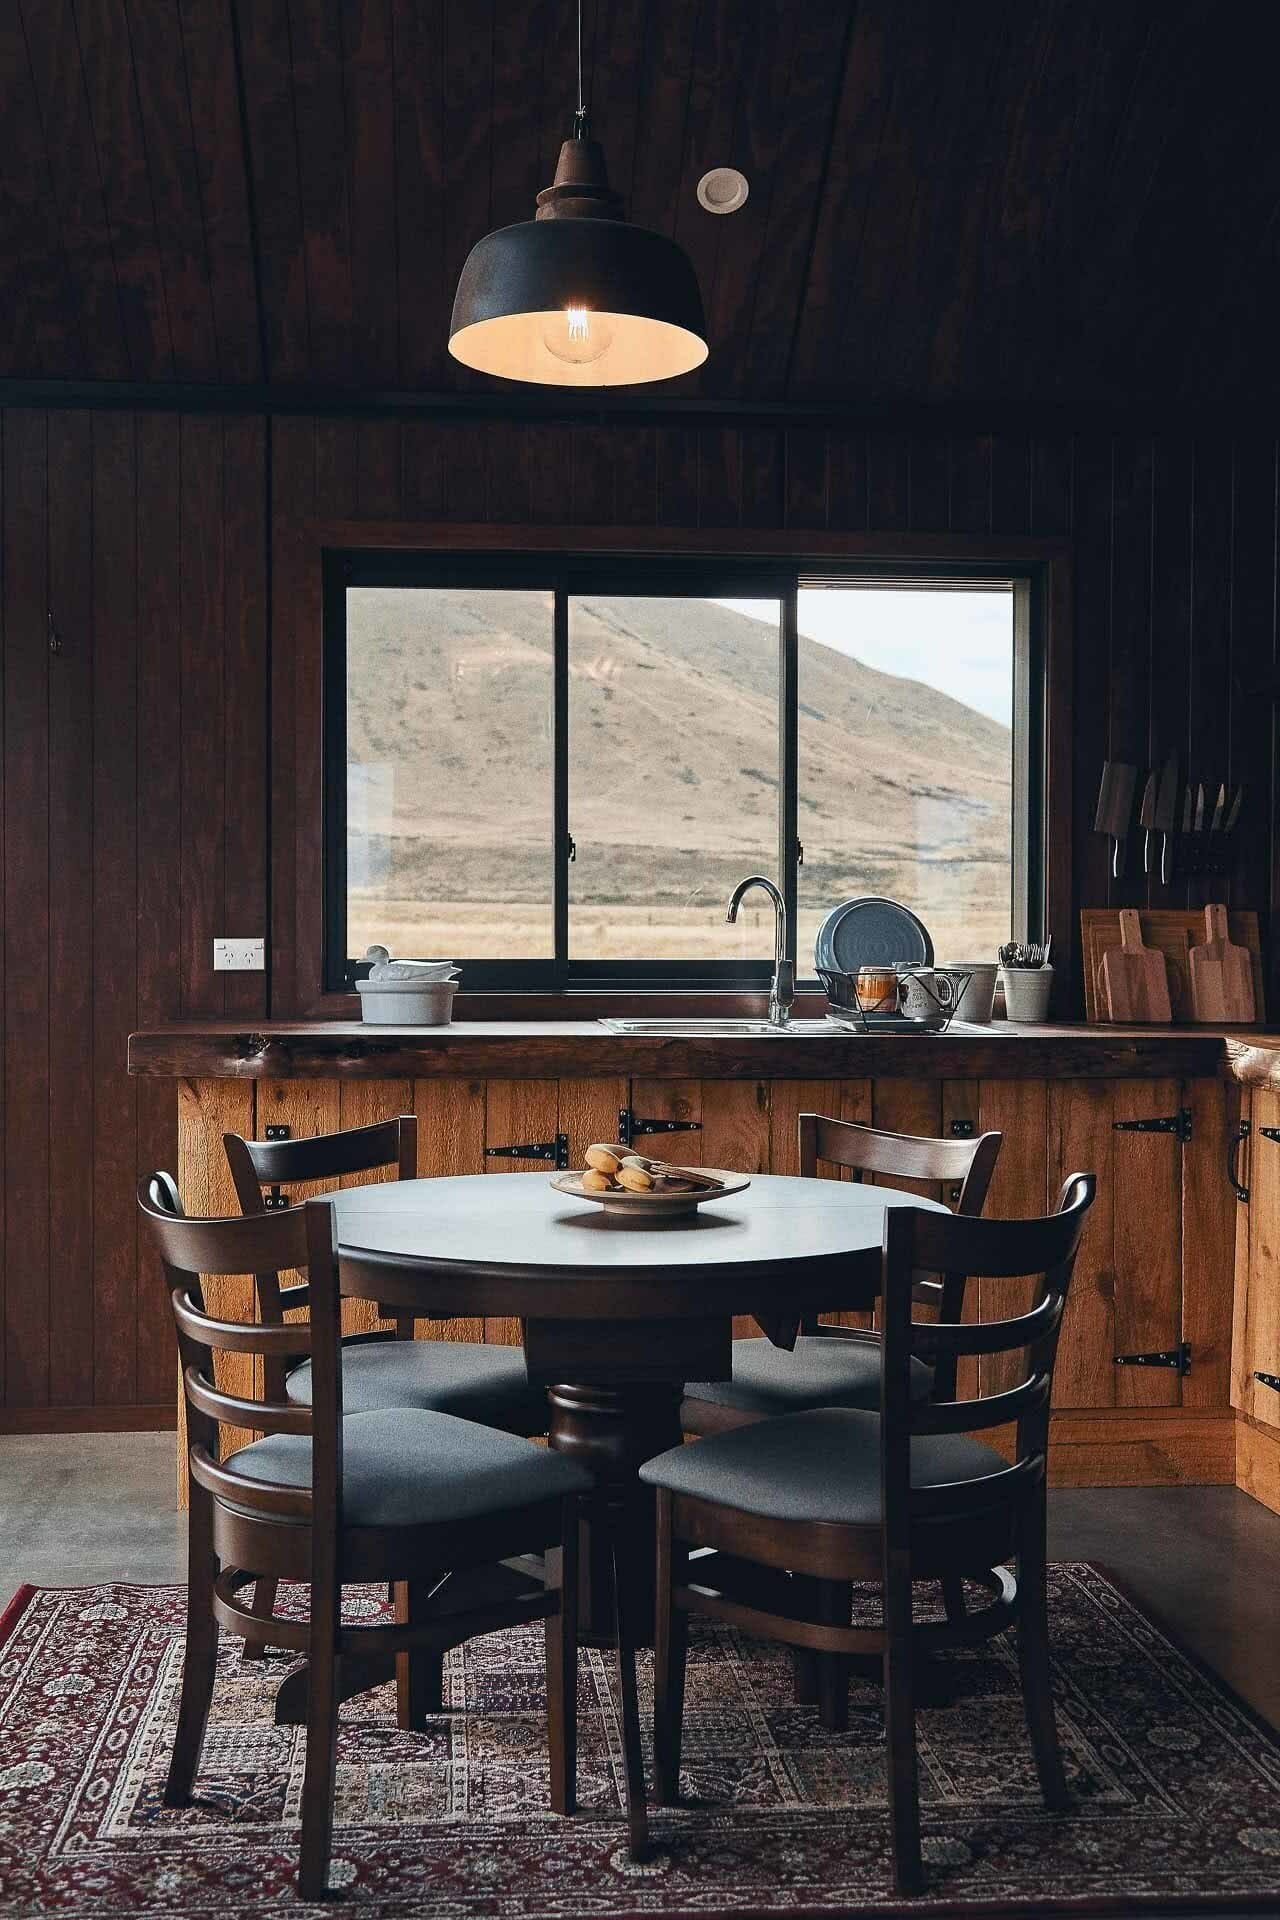 This High Country Cabin Offers the Wild Isolation We All Need Right Now, photo by Kenny Smith, cabin, isolation, twizel, south island, new zealand, dining room